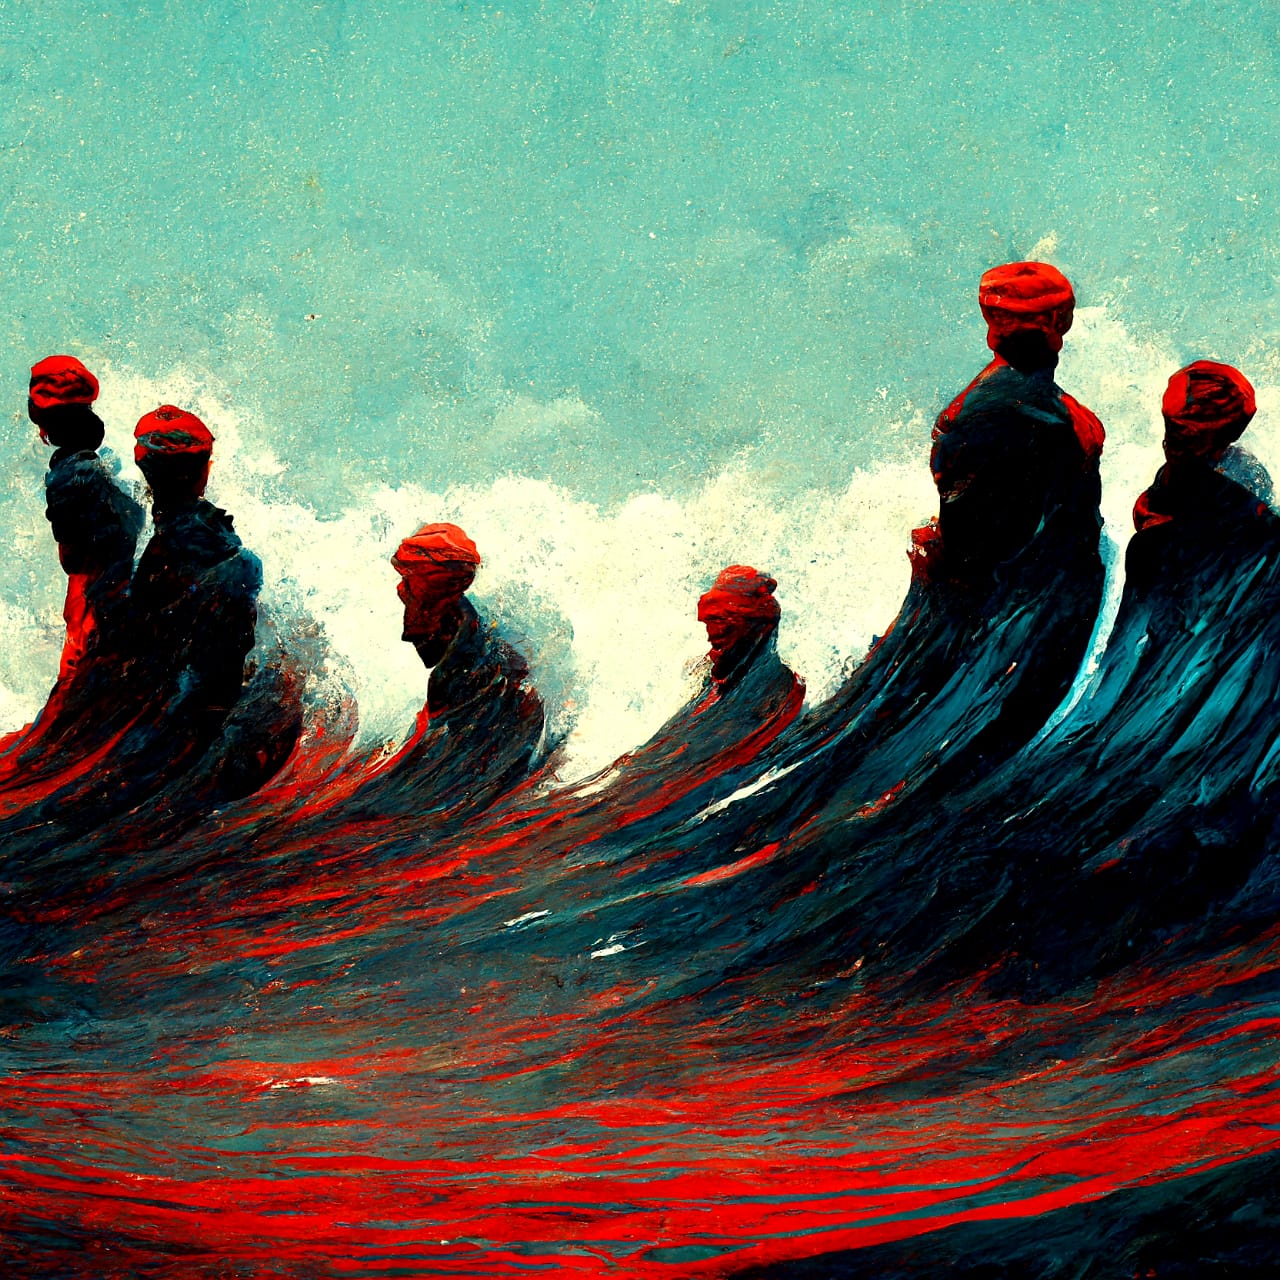 Waves of idiots